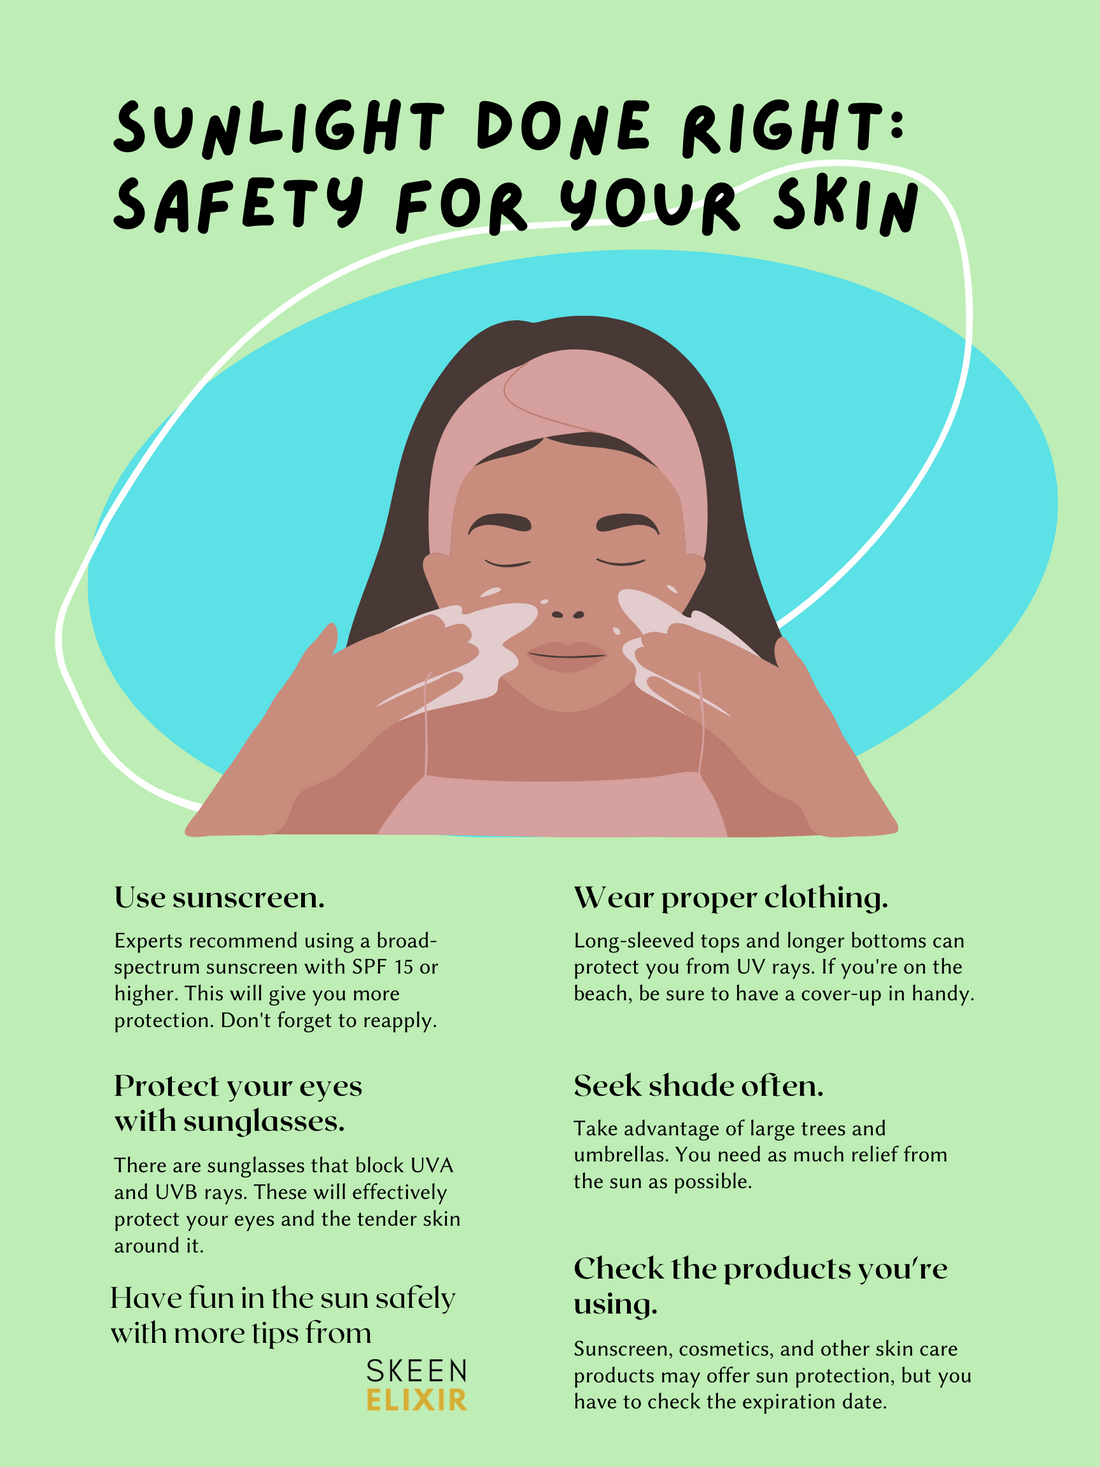 Sunlight done right: Safety for your skin